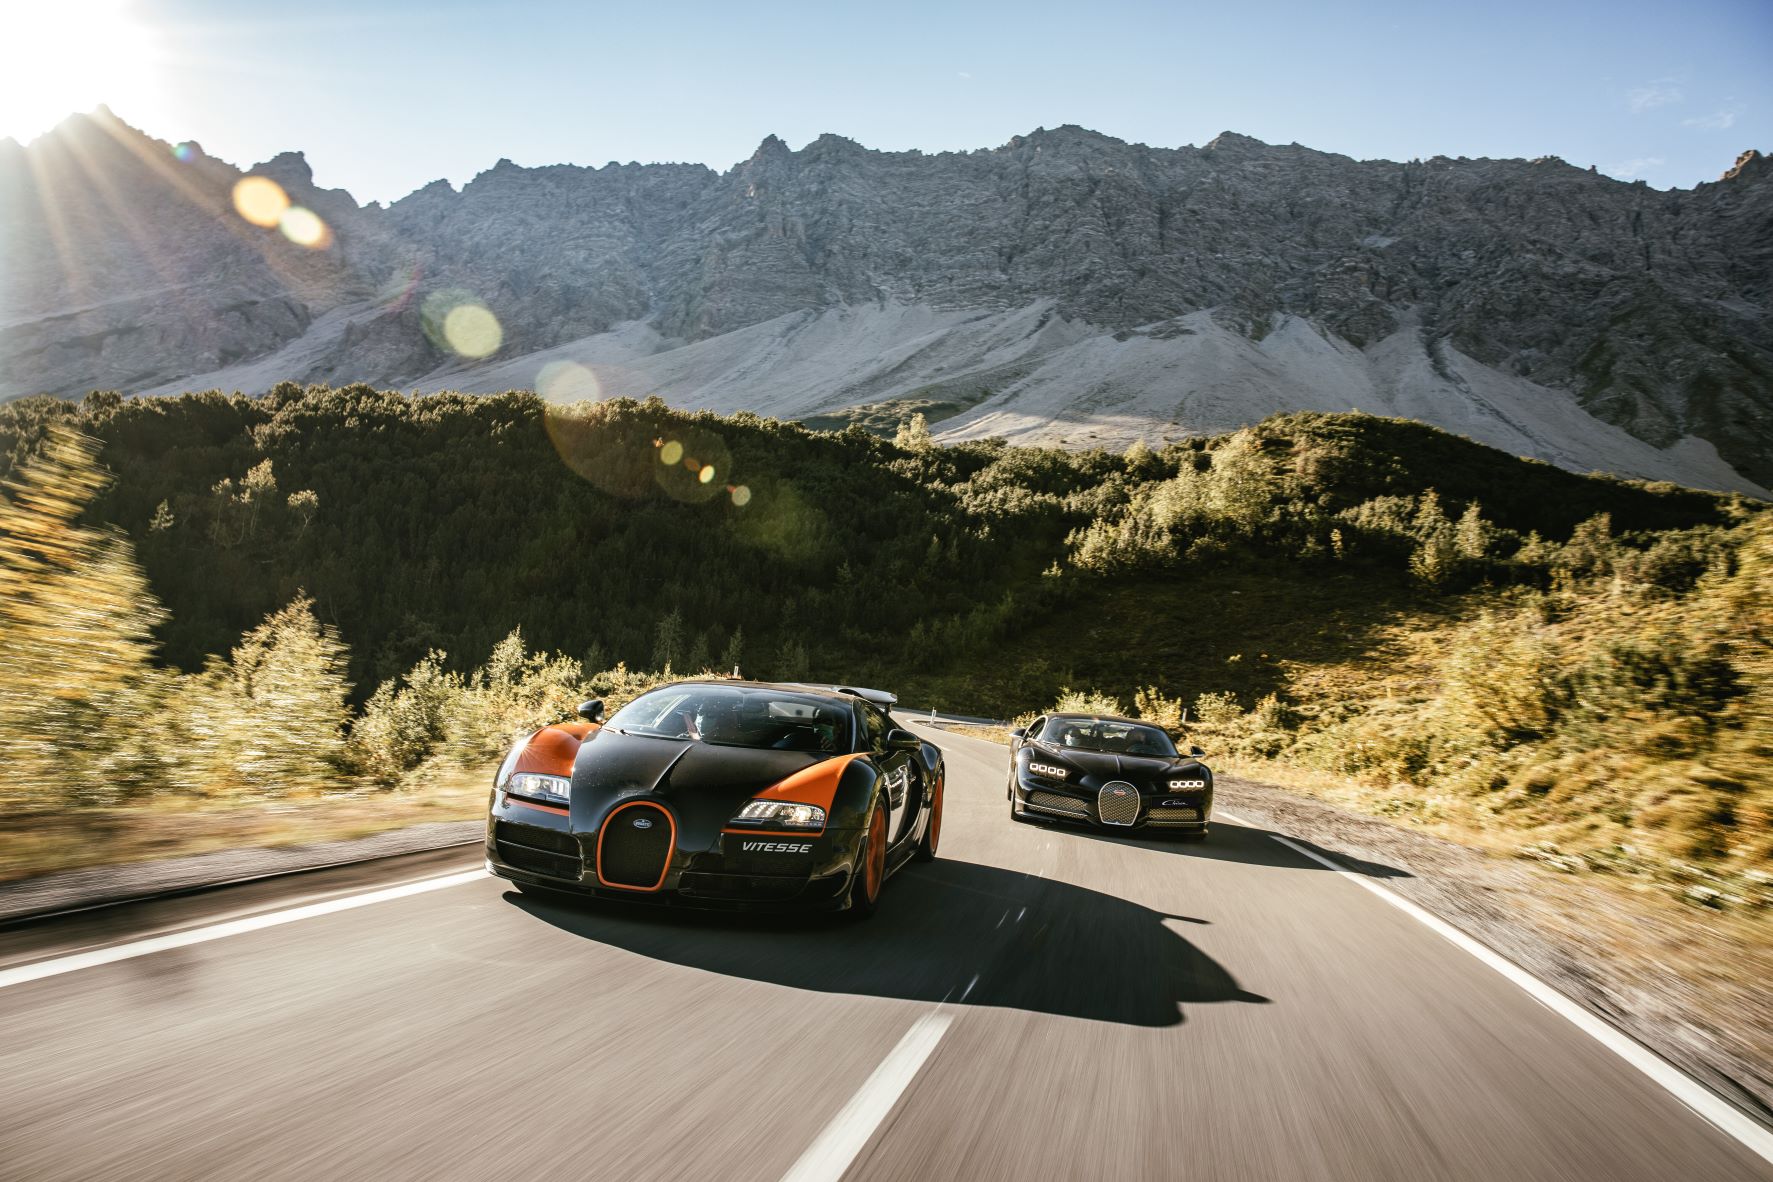 A Bugatti Veyron and Chiron on a mountain road